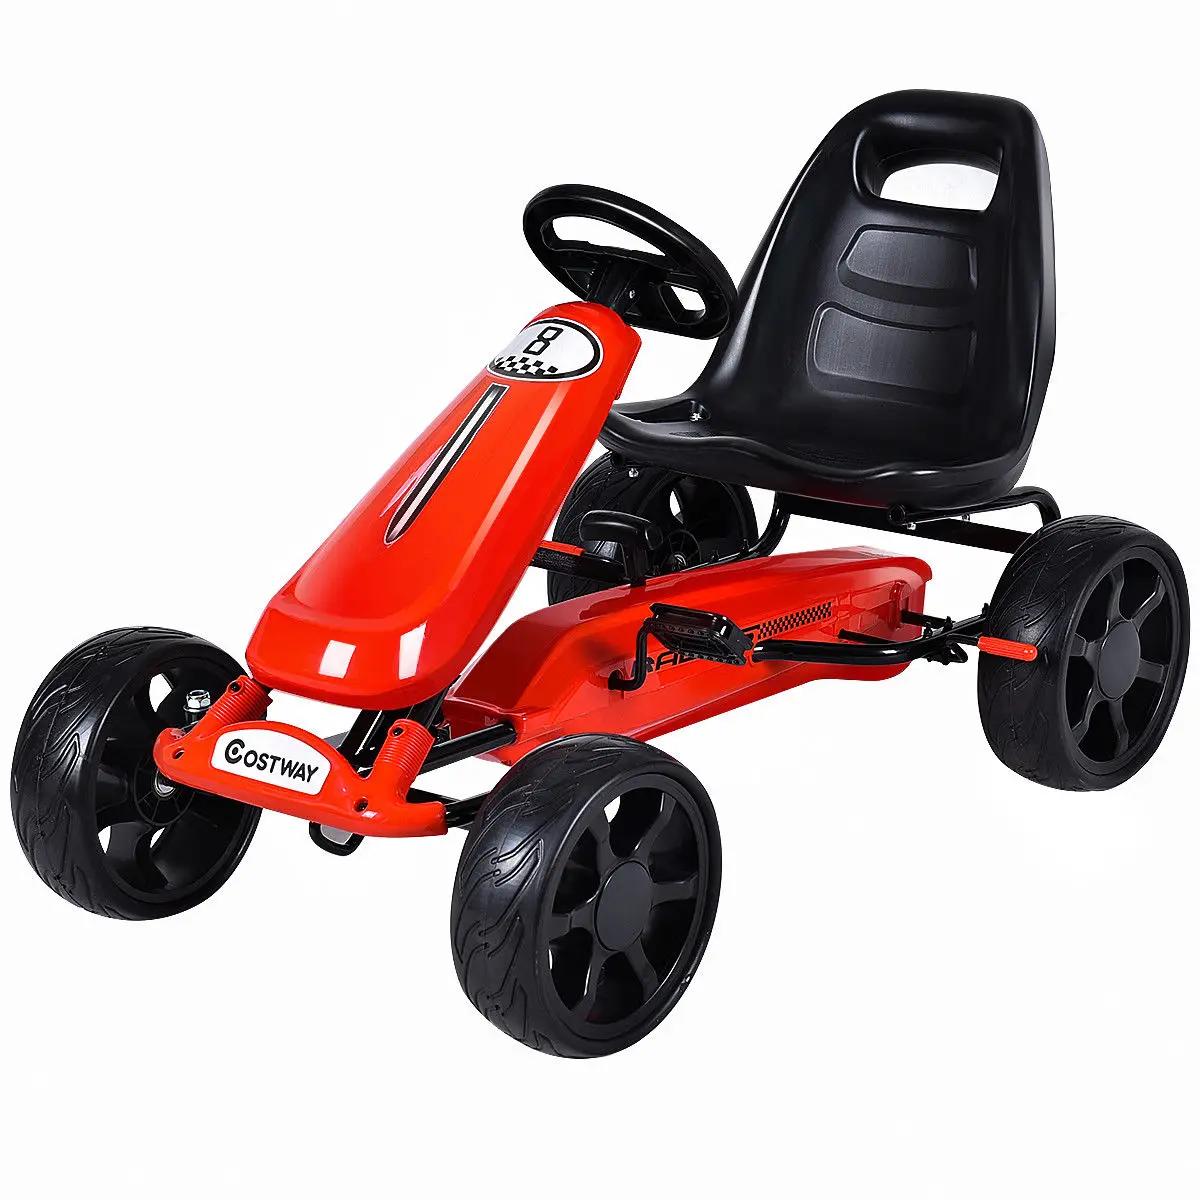 

Go Kart Kids Ride On Car Pedal Powered Car 4 Wheel Racer Toy Stealth Outdoor New